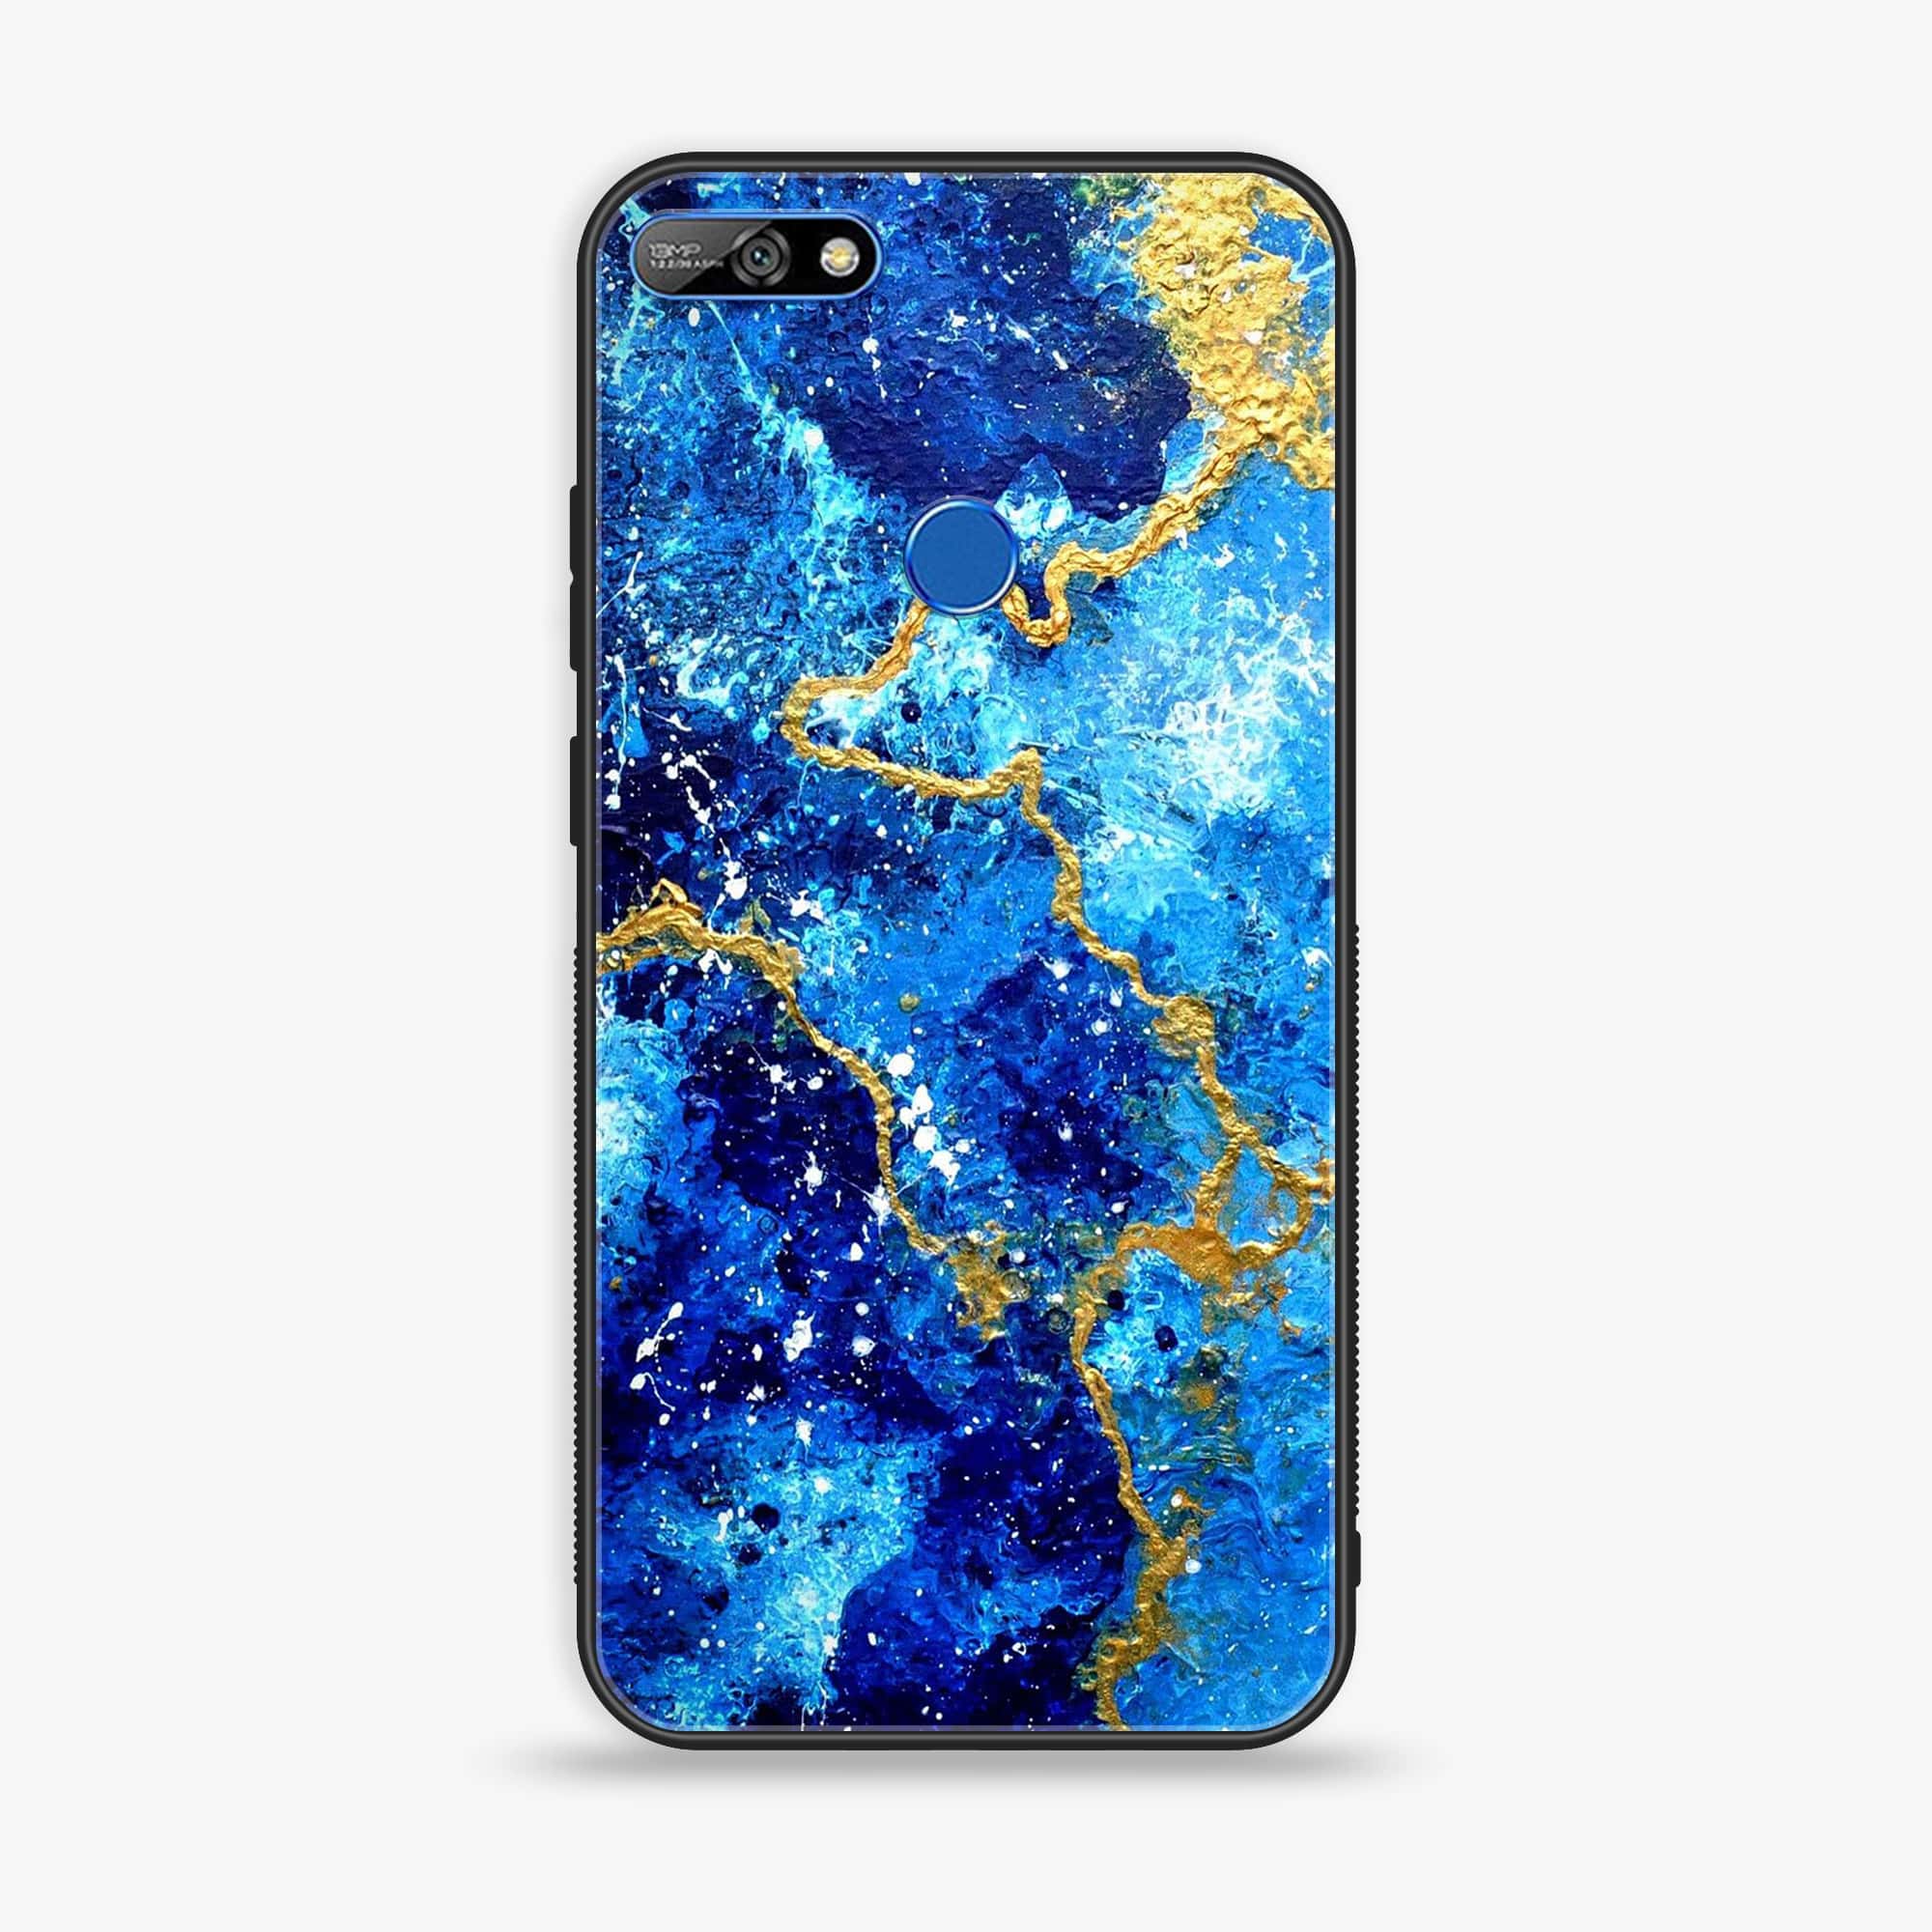 Huawei Y7 Prime (2018) - Blue Marble Series V 2.0 - Premium Printed Glass soft Bumper shock Proof Case